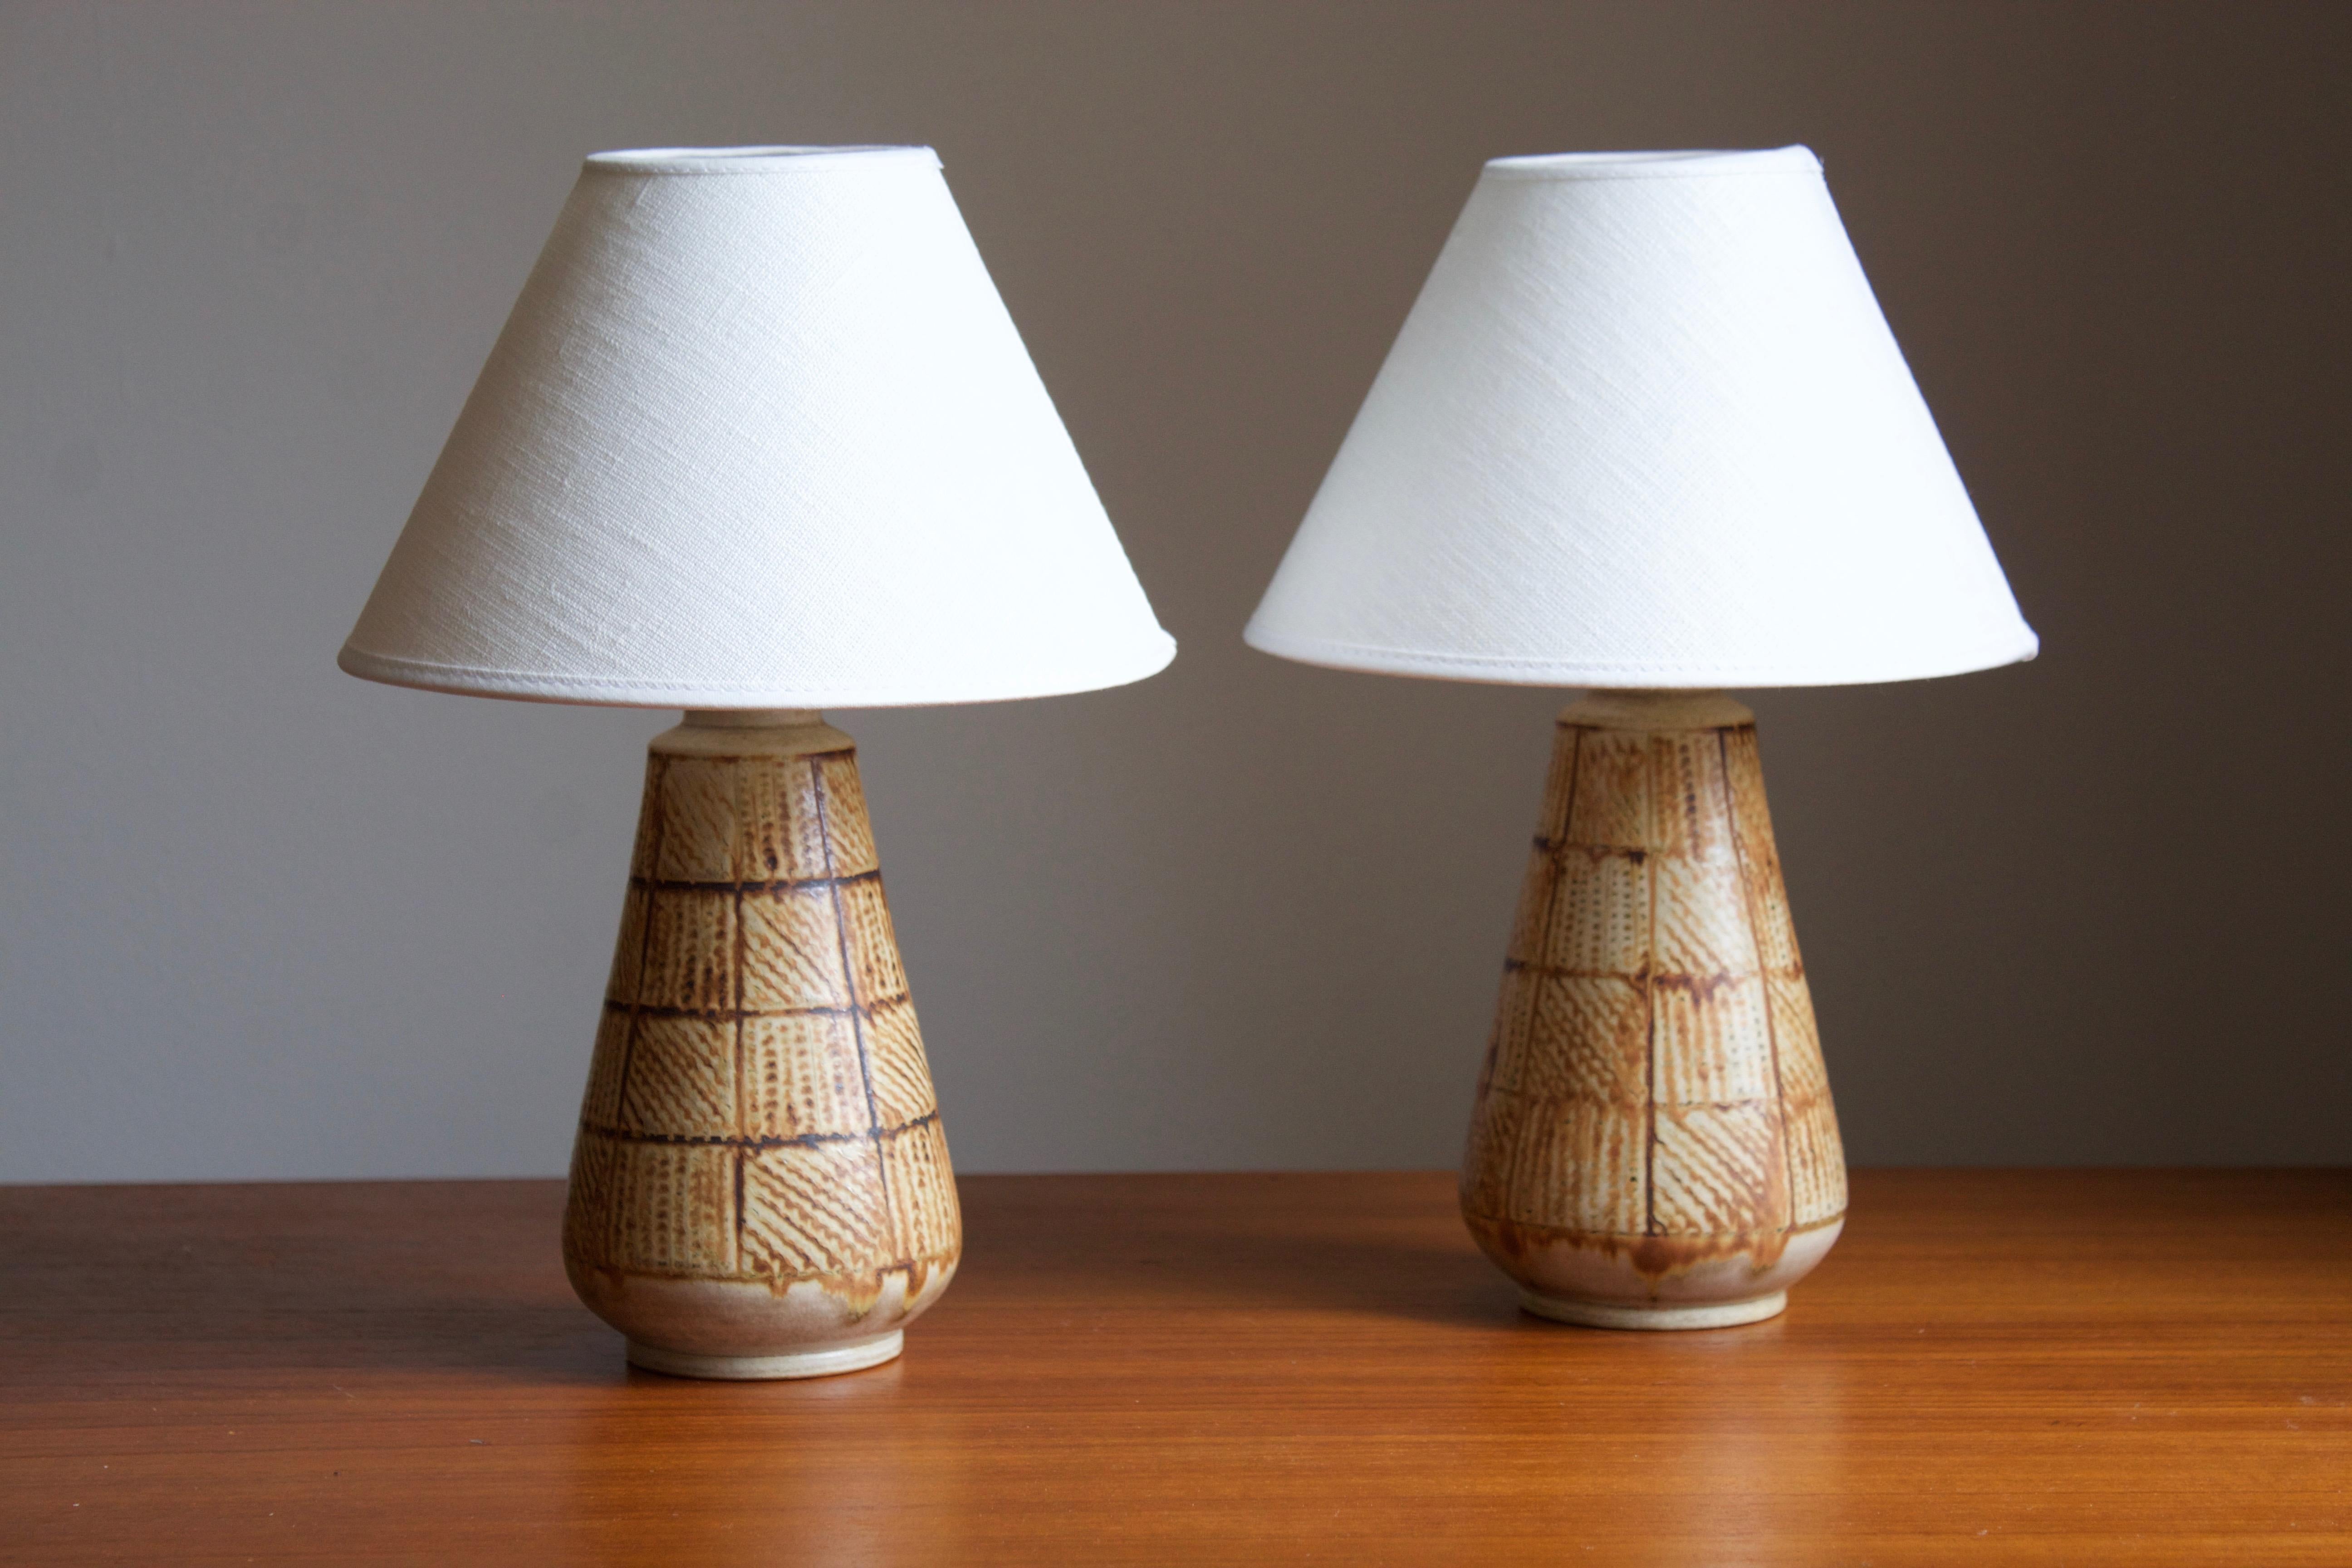 A pair of table lamps, produced by Andersson Johansson, Höganäs, Sweden, 1930s. Features simple incised and hand-painted decor. In stone or earthenware.

Sold without lampshades. Stated dimensions exclude lampshades. 

Glaze features brown-beige